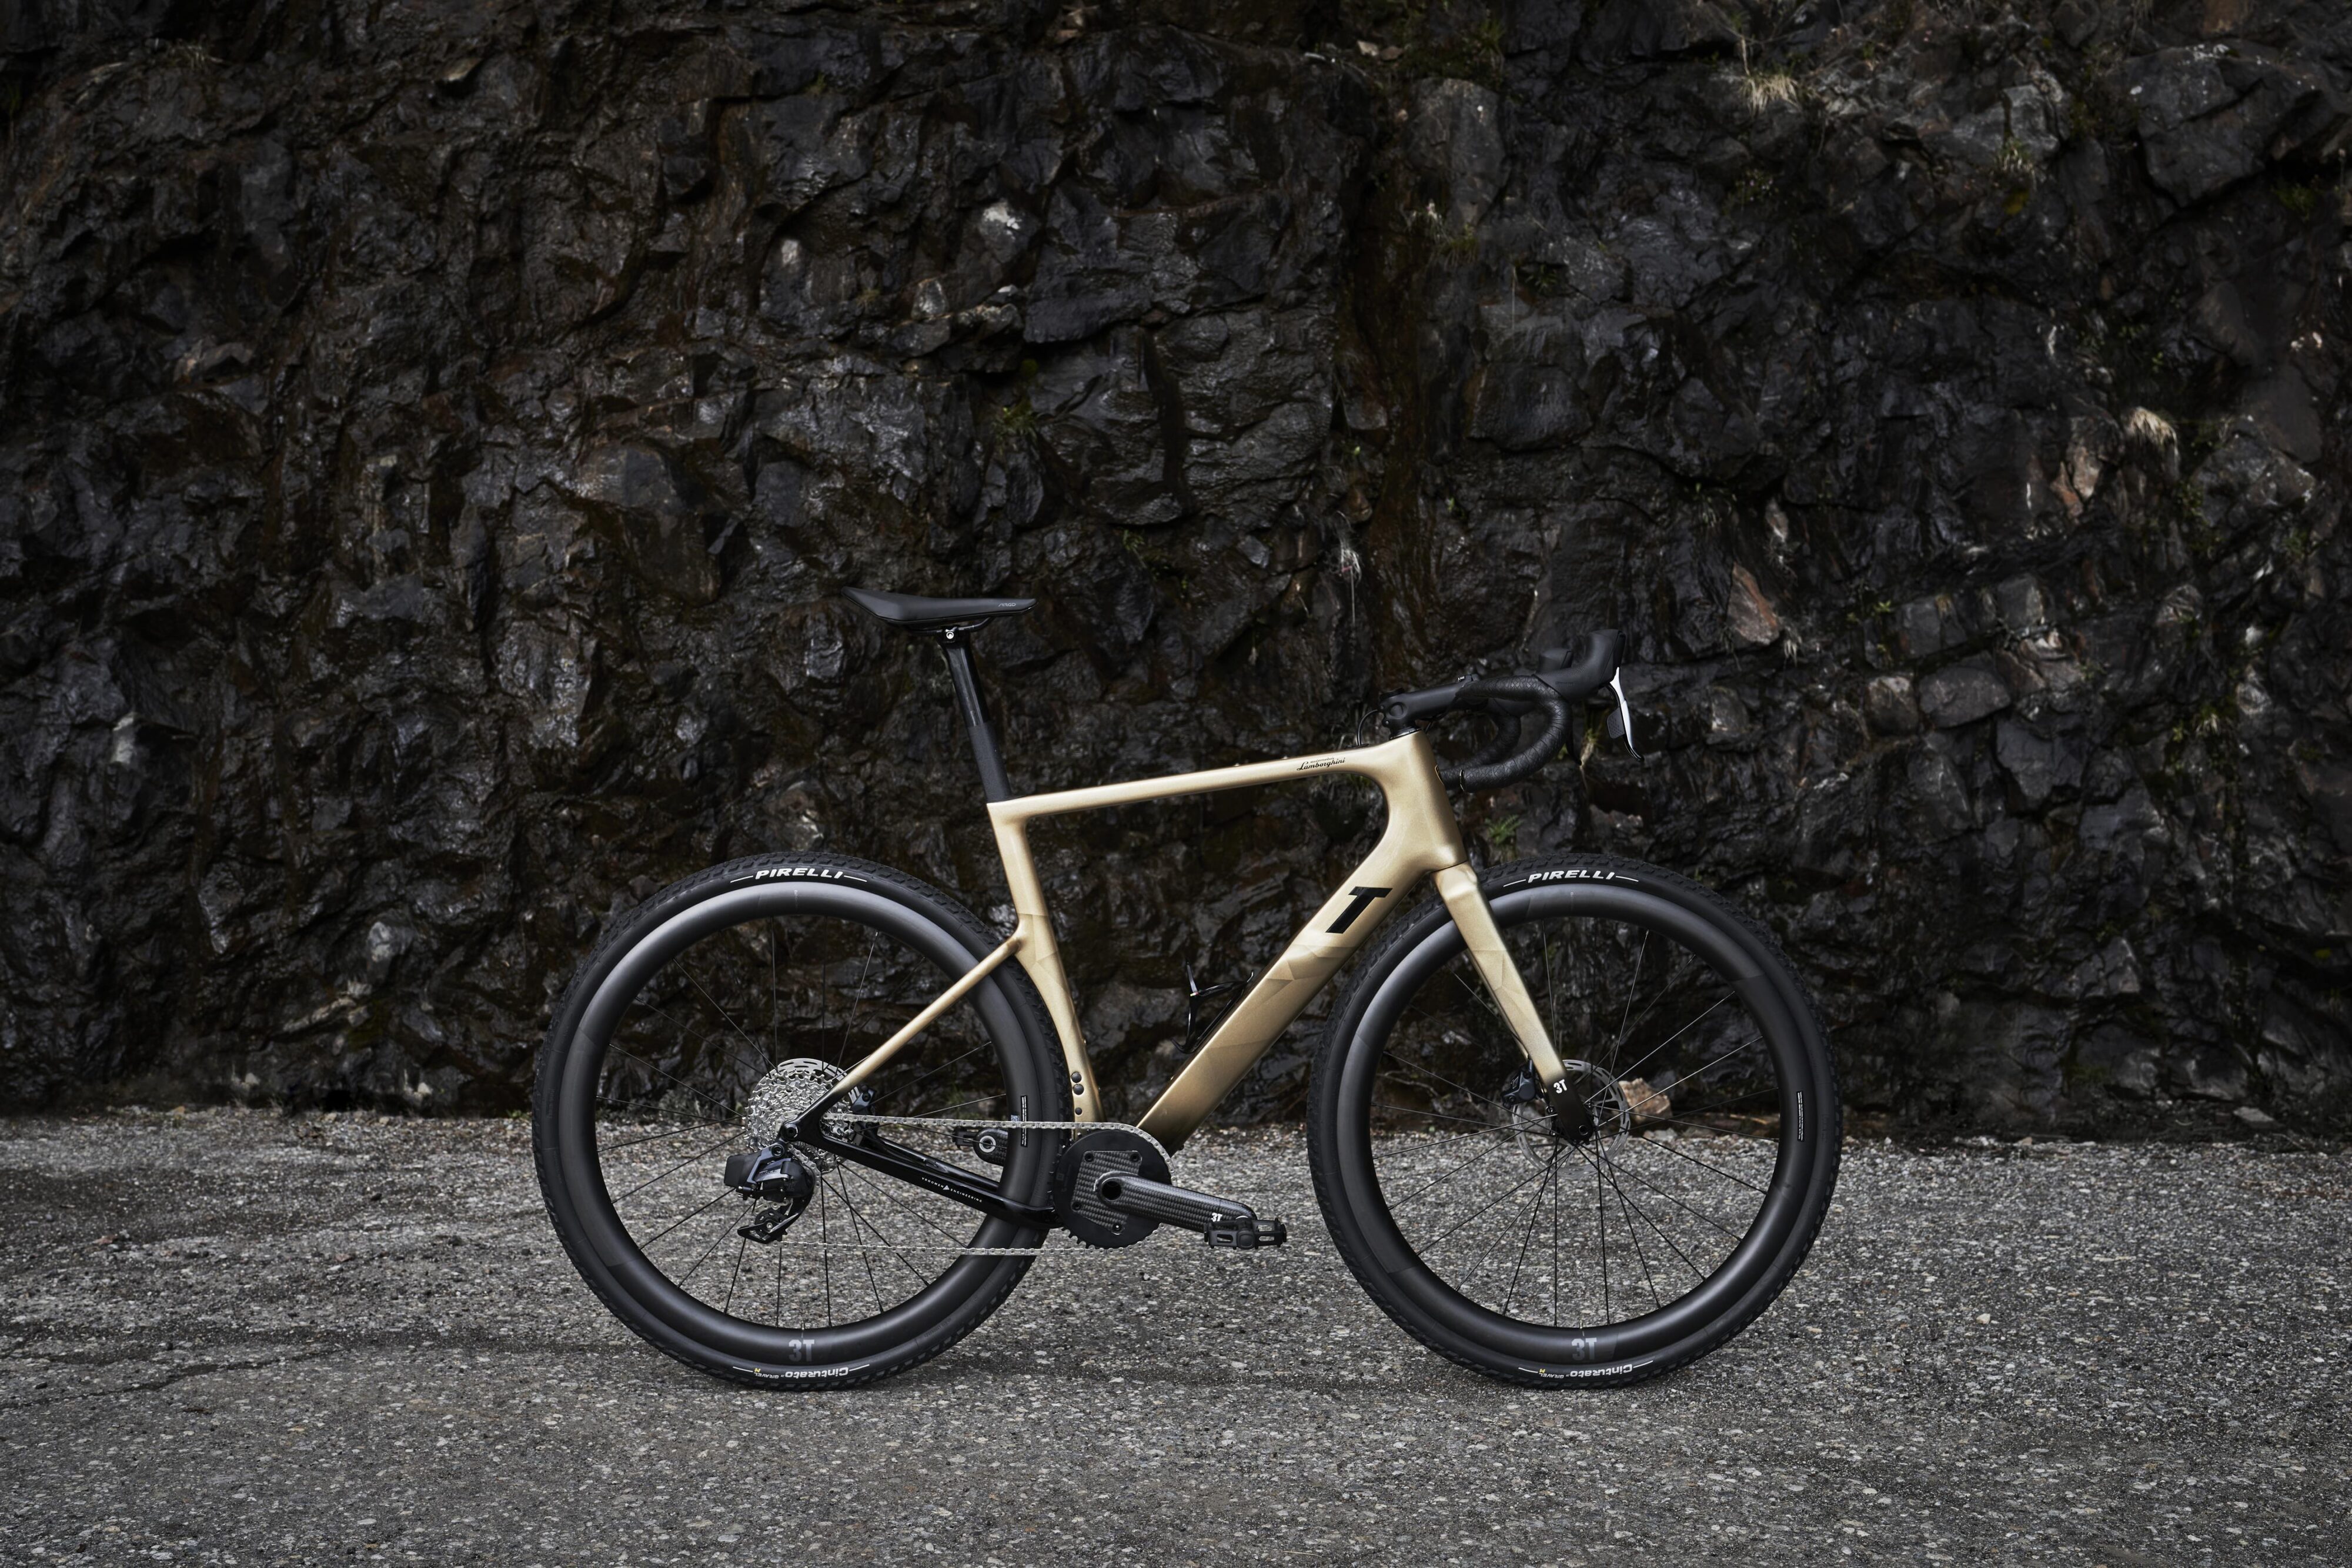 Previous collaboration between Lamborghini and 3T bicycles 